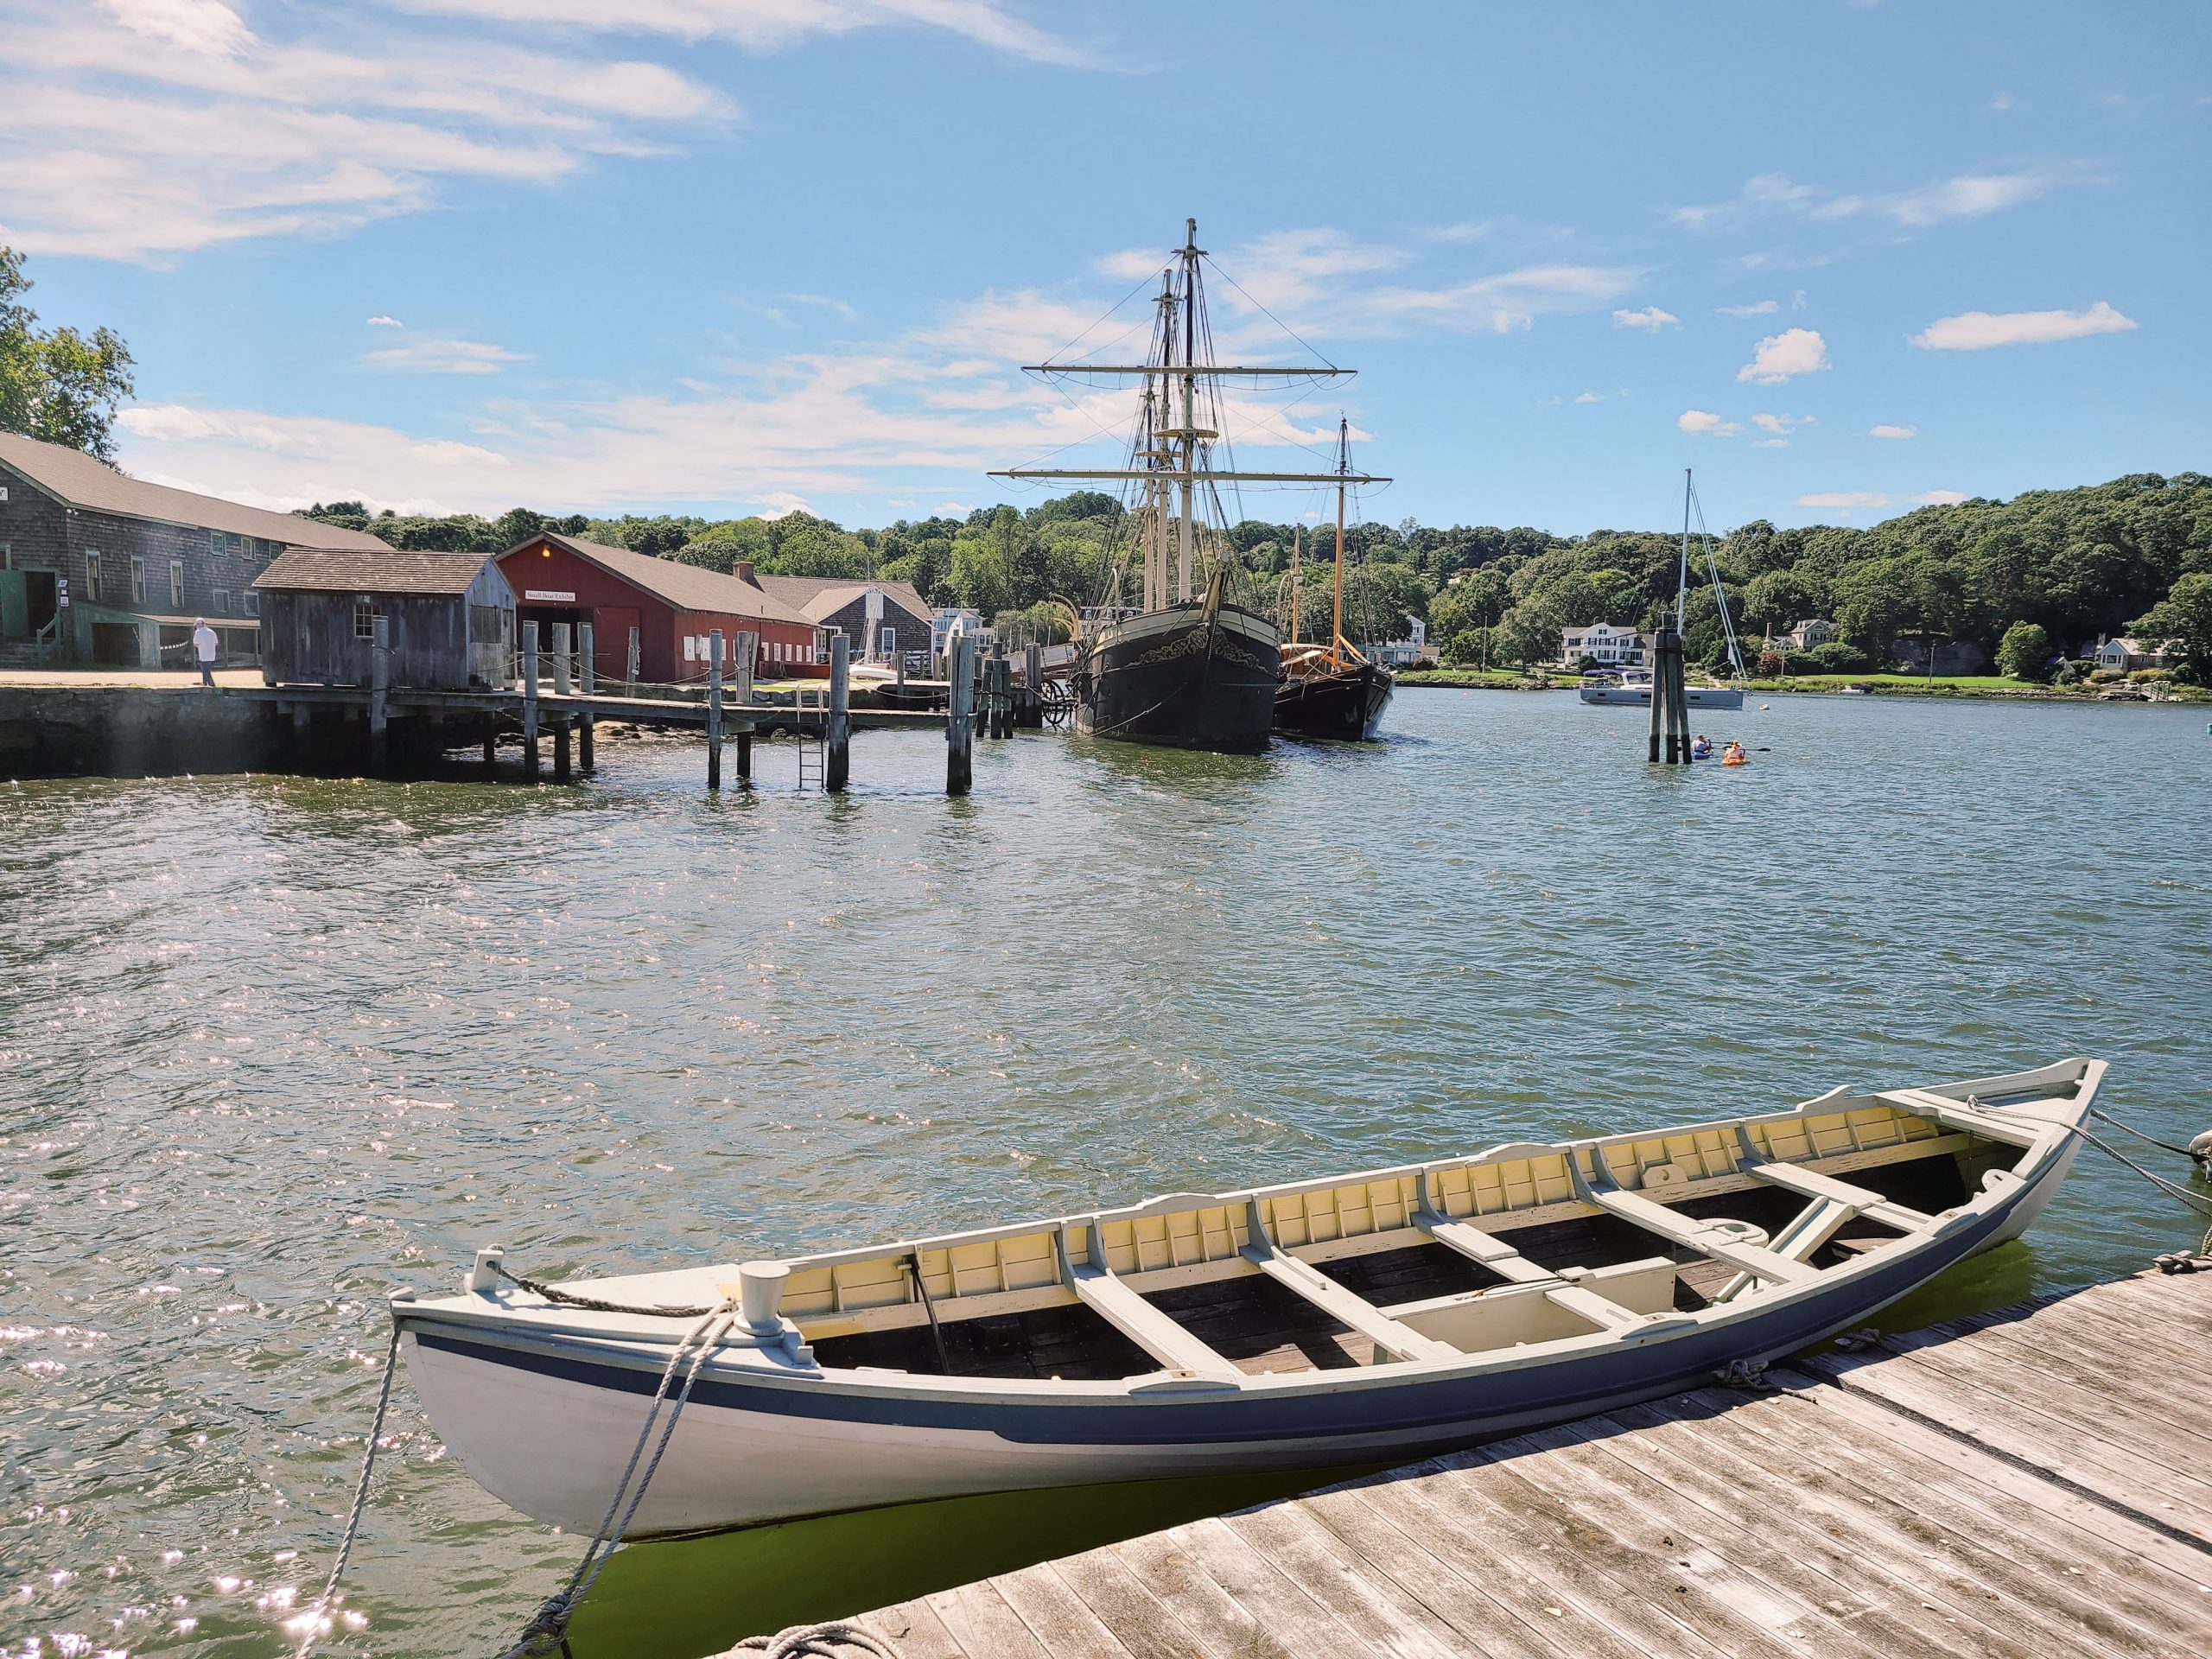 A photo of several boats and ships in the water in Mystic, Connecticut